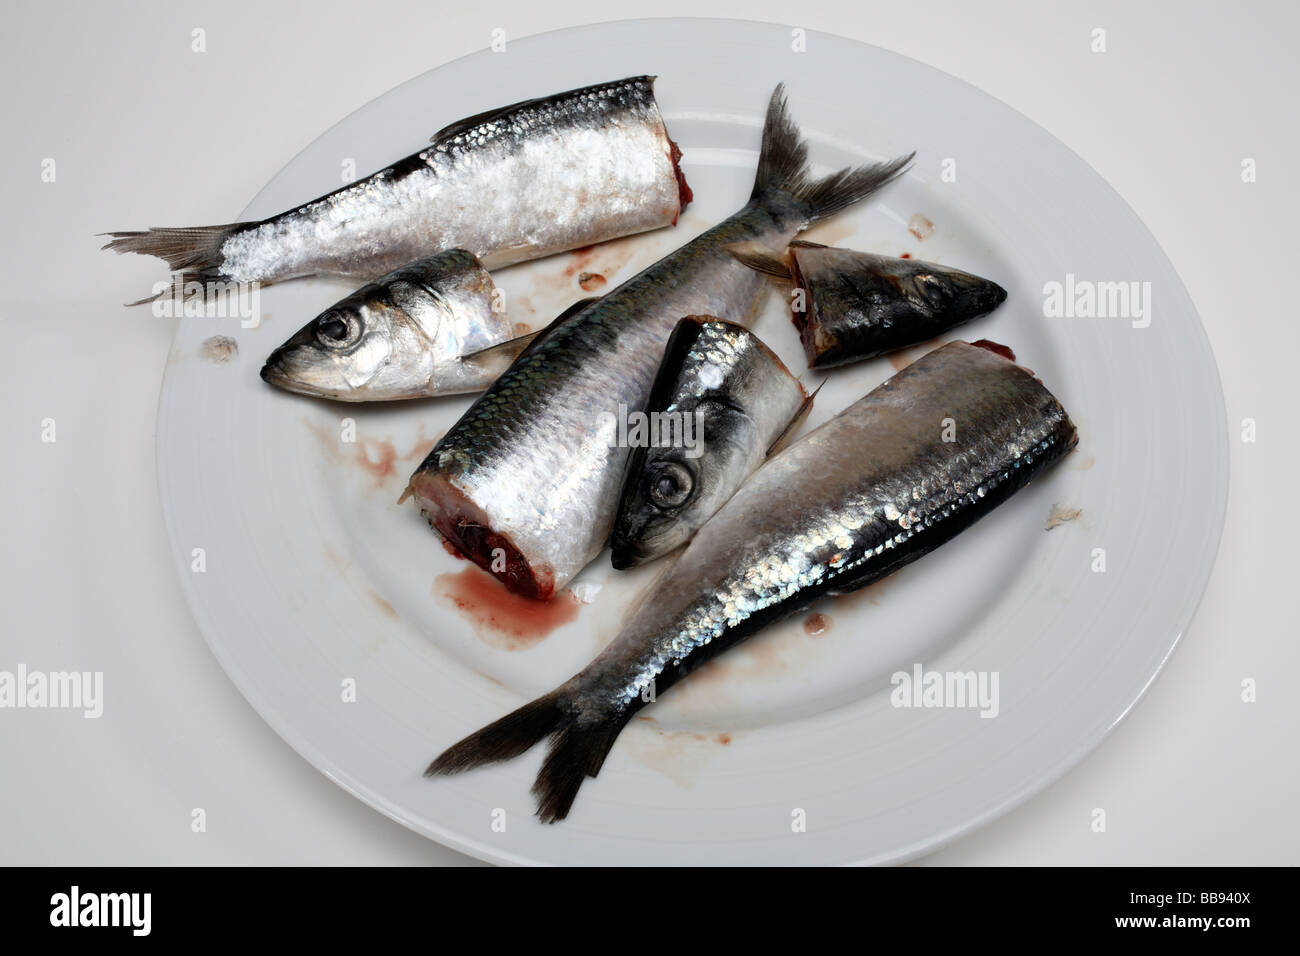 Cut up Herring on white plate Stock Photo